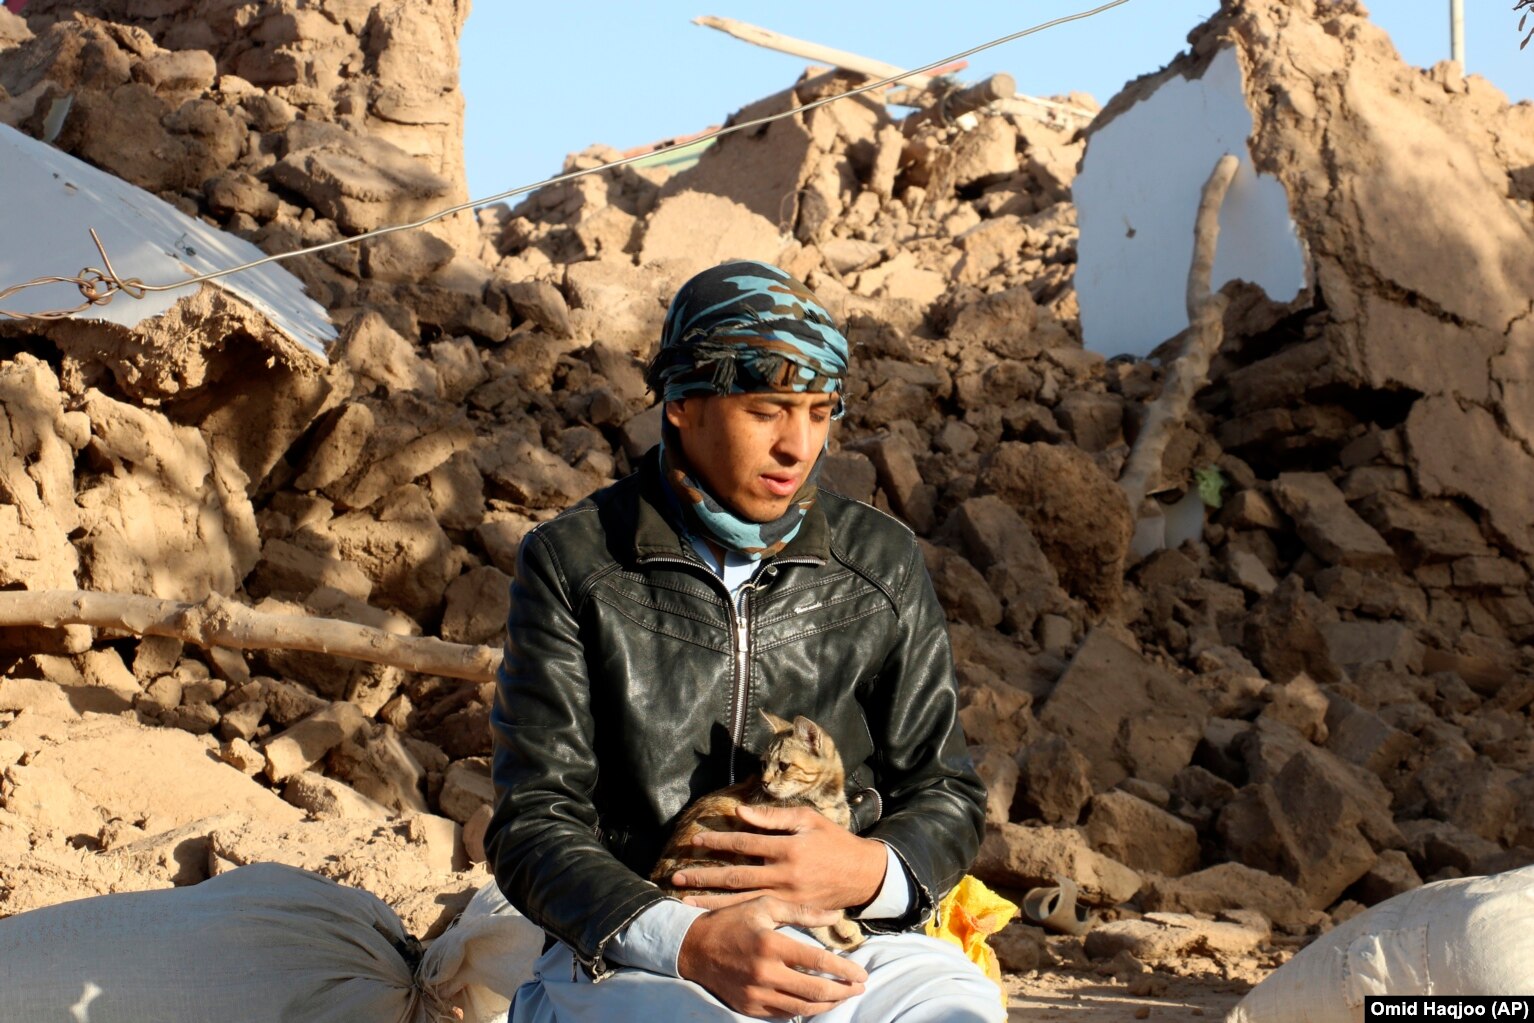 &nbsp;An Afghan youth holds his cat as he sits in a courtyard of his destroyed home. Mullah Janan Sayeeq, a spokesman for the Taliban&#39;s Ministry of Disasters, told a news conference that 2,440 people were dead, about 10,000 were injured, and that more than 2,000 houses had been damaged or destroyed.&nbsp;Afghanistan&#39;s disaster agency said on October 8 that 2,053 people had been killed. Neither estimate could be independently confirmed.